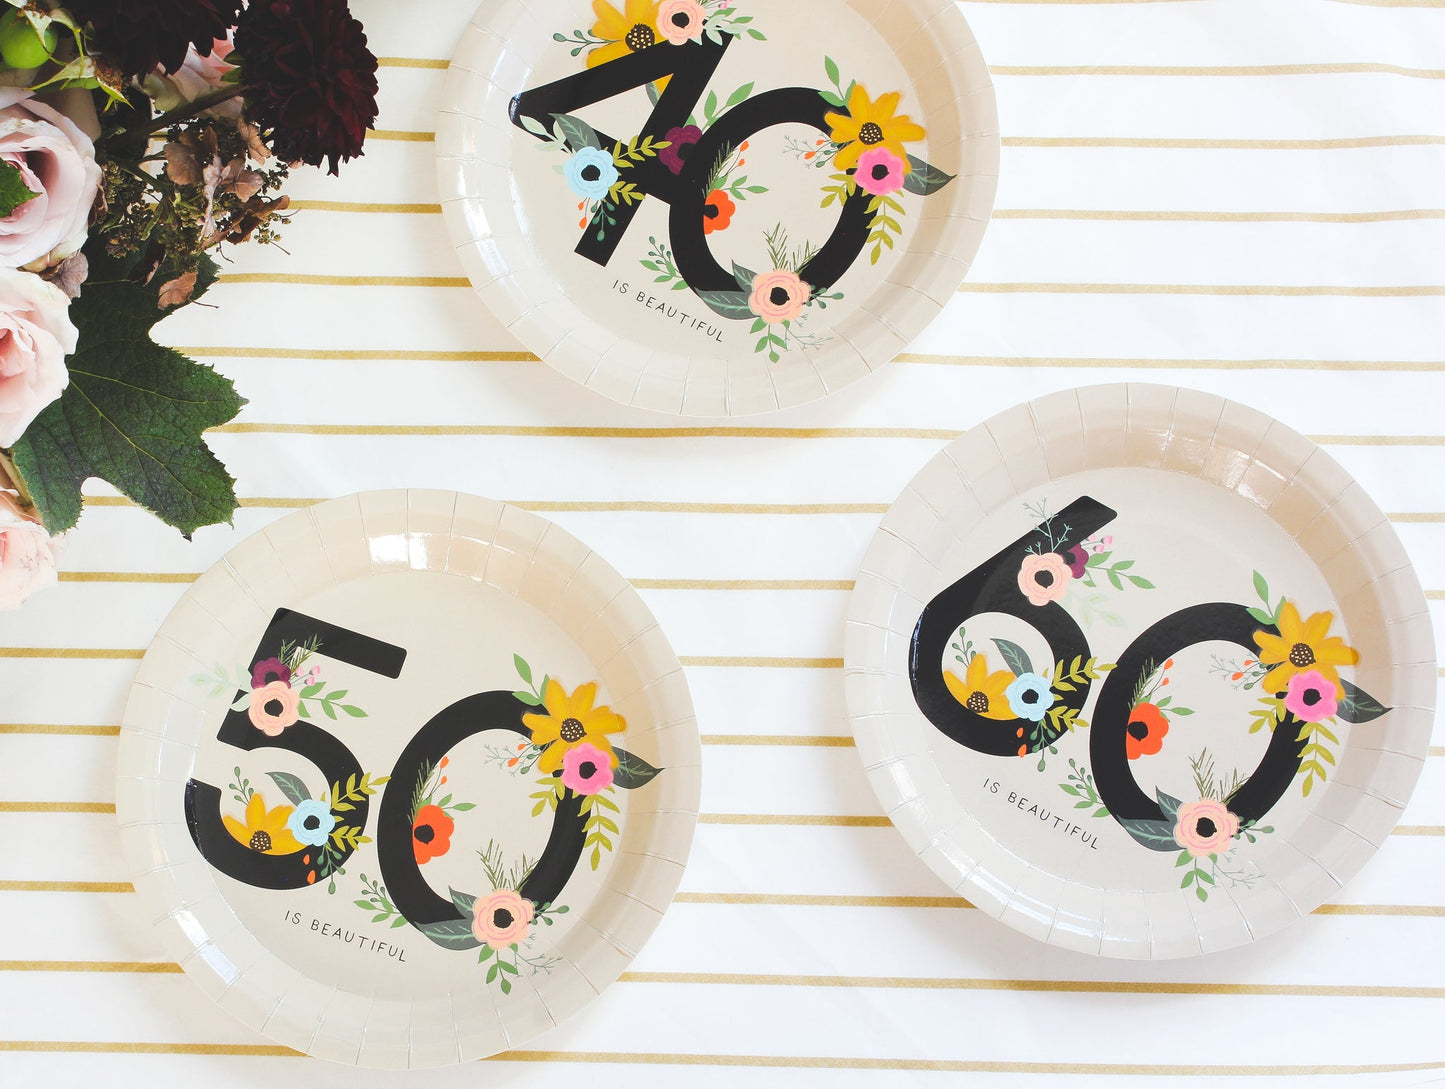 40 is Beautiful Birthday Party Plates